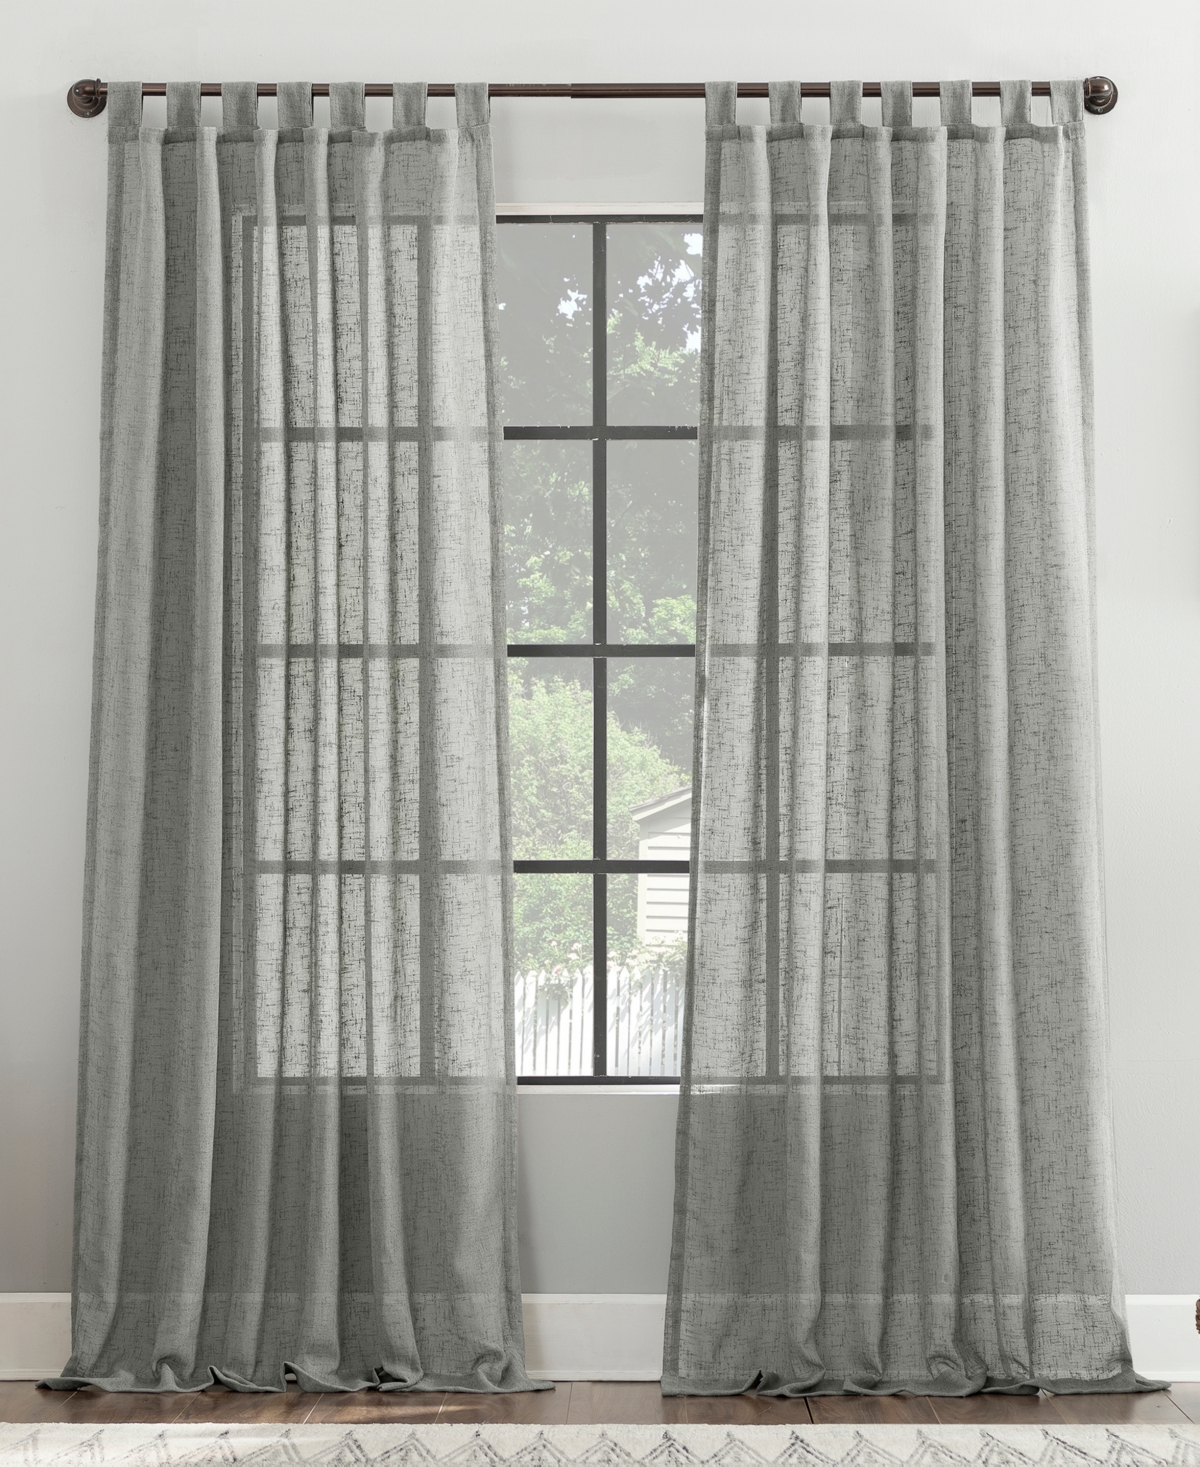 Archaeo Tansy Burlap Weave Tab Top Curtain Panel, 50"x 63" In Sterling